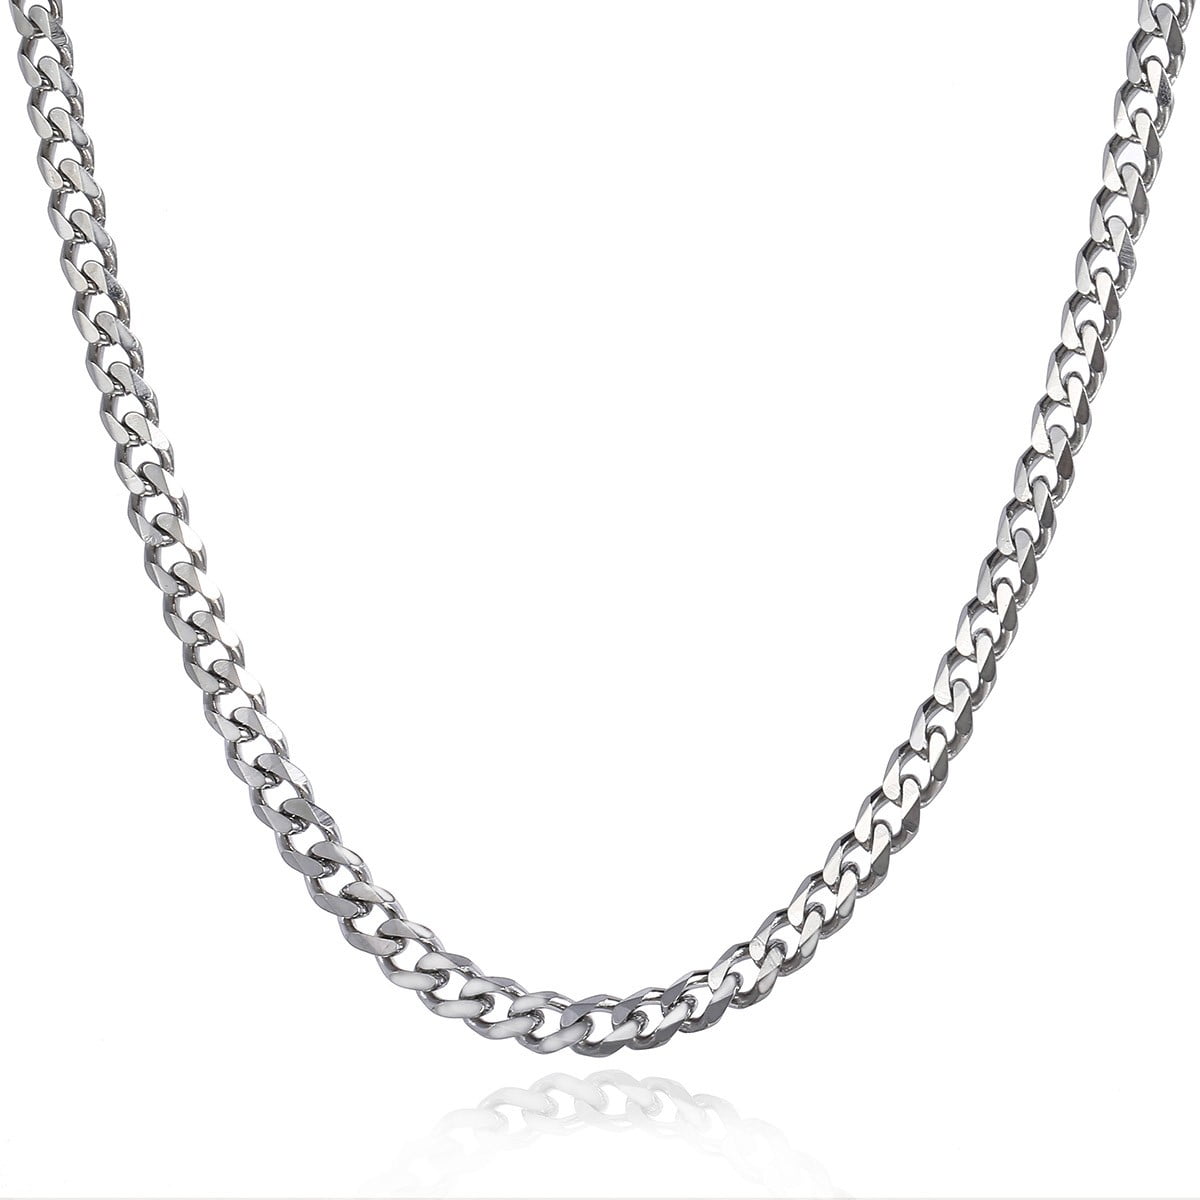 24"MEN Stainless Steel 8mm Silver Flat Byzantine Box Link Chain Necklace*N156 